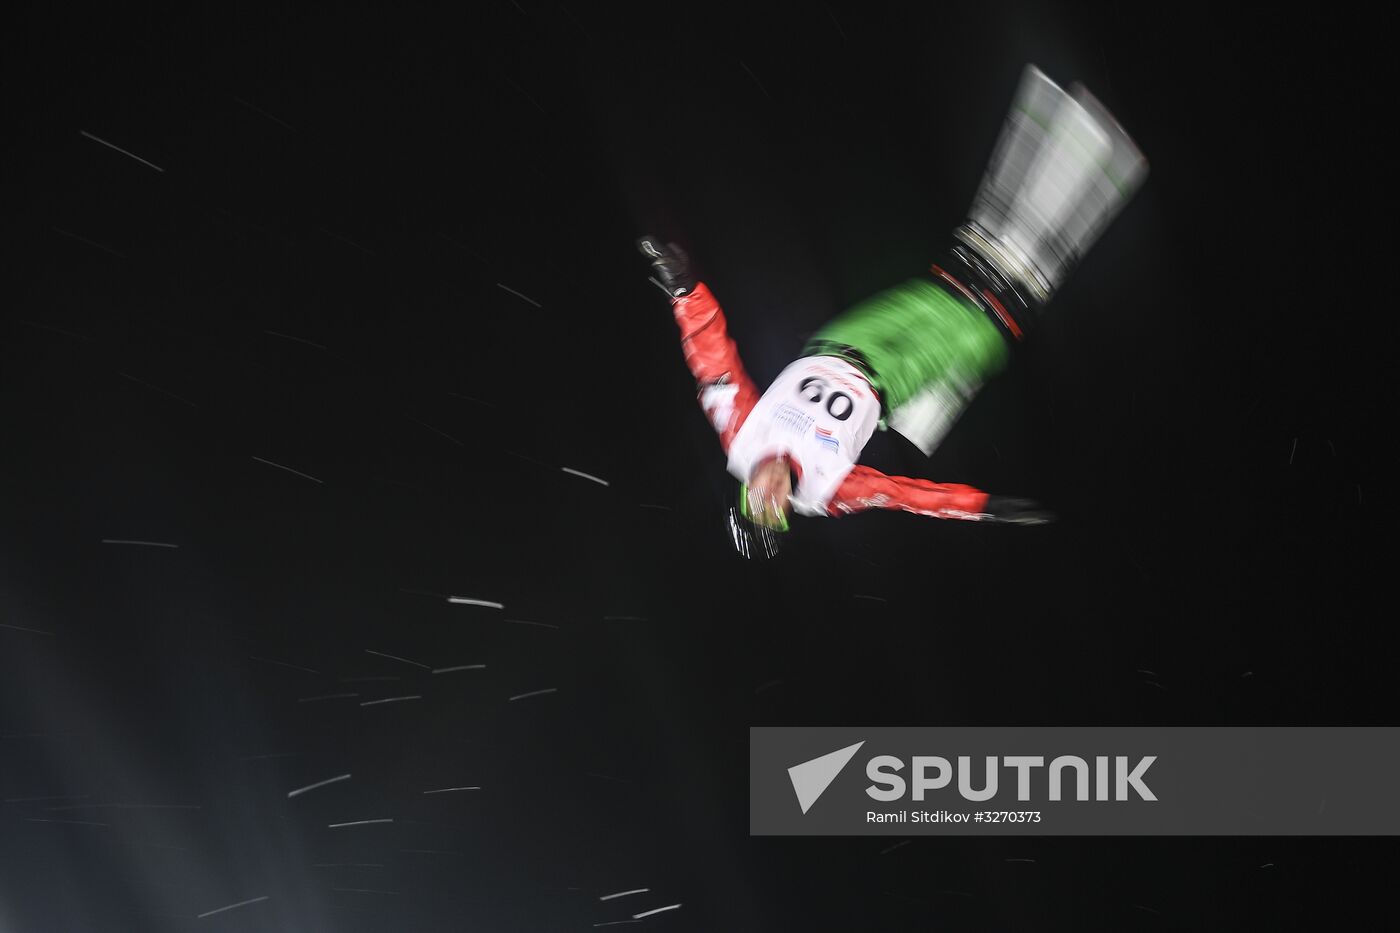 Freestyle World Cup stage. Aerial skiing